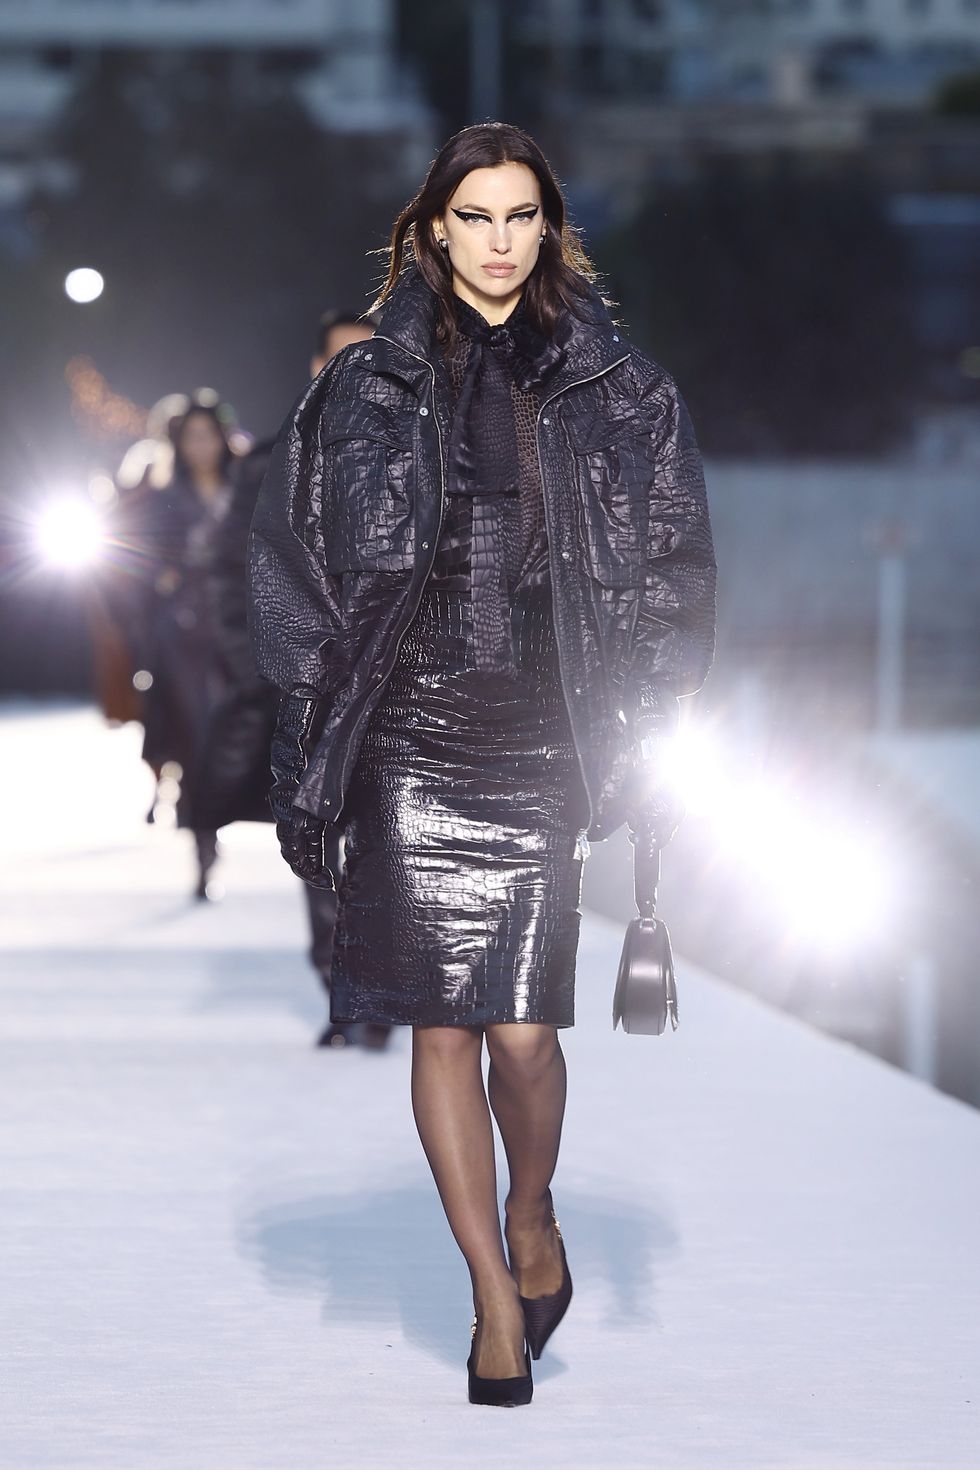 west hollywood, california march 09 irina shayk walks the runway during the versace fw23 show at pacific design center on march 09, 2023 in west hollywood, california photo by arturo holmesgetty images